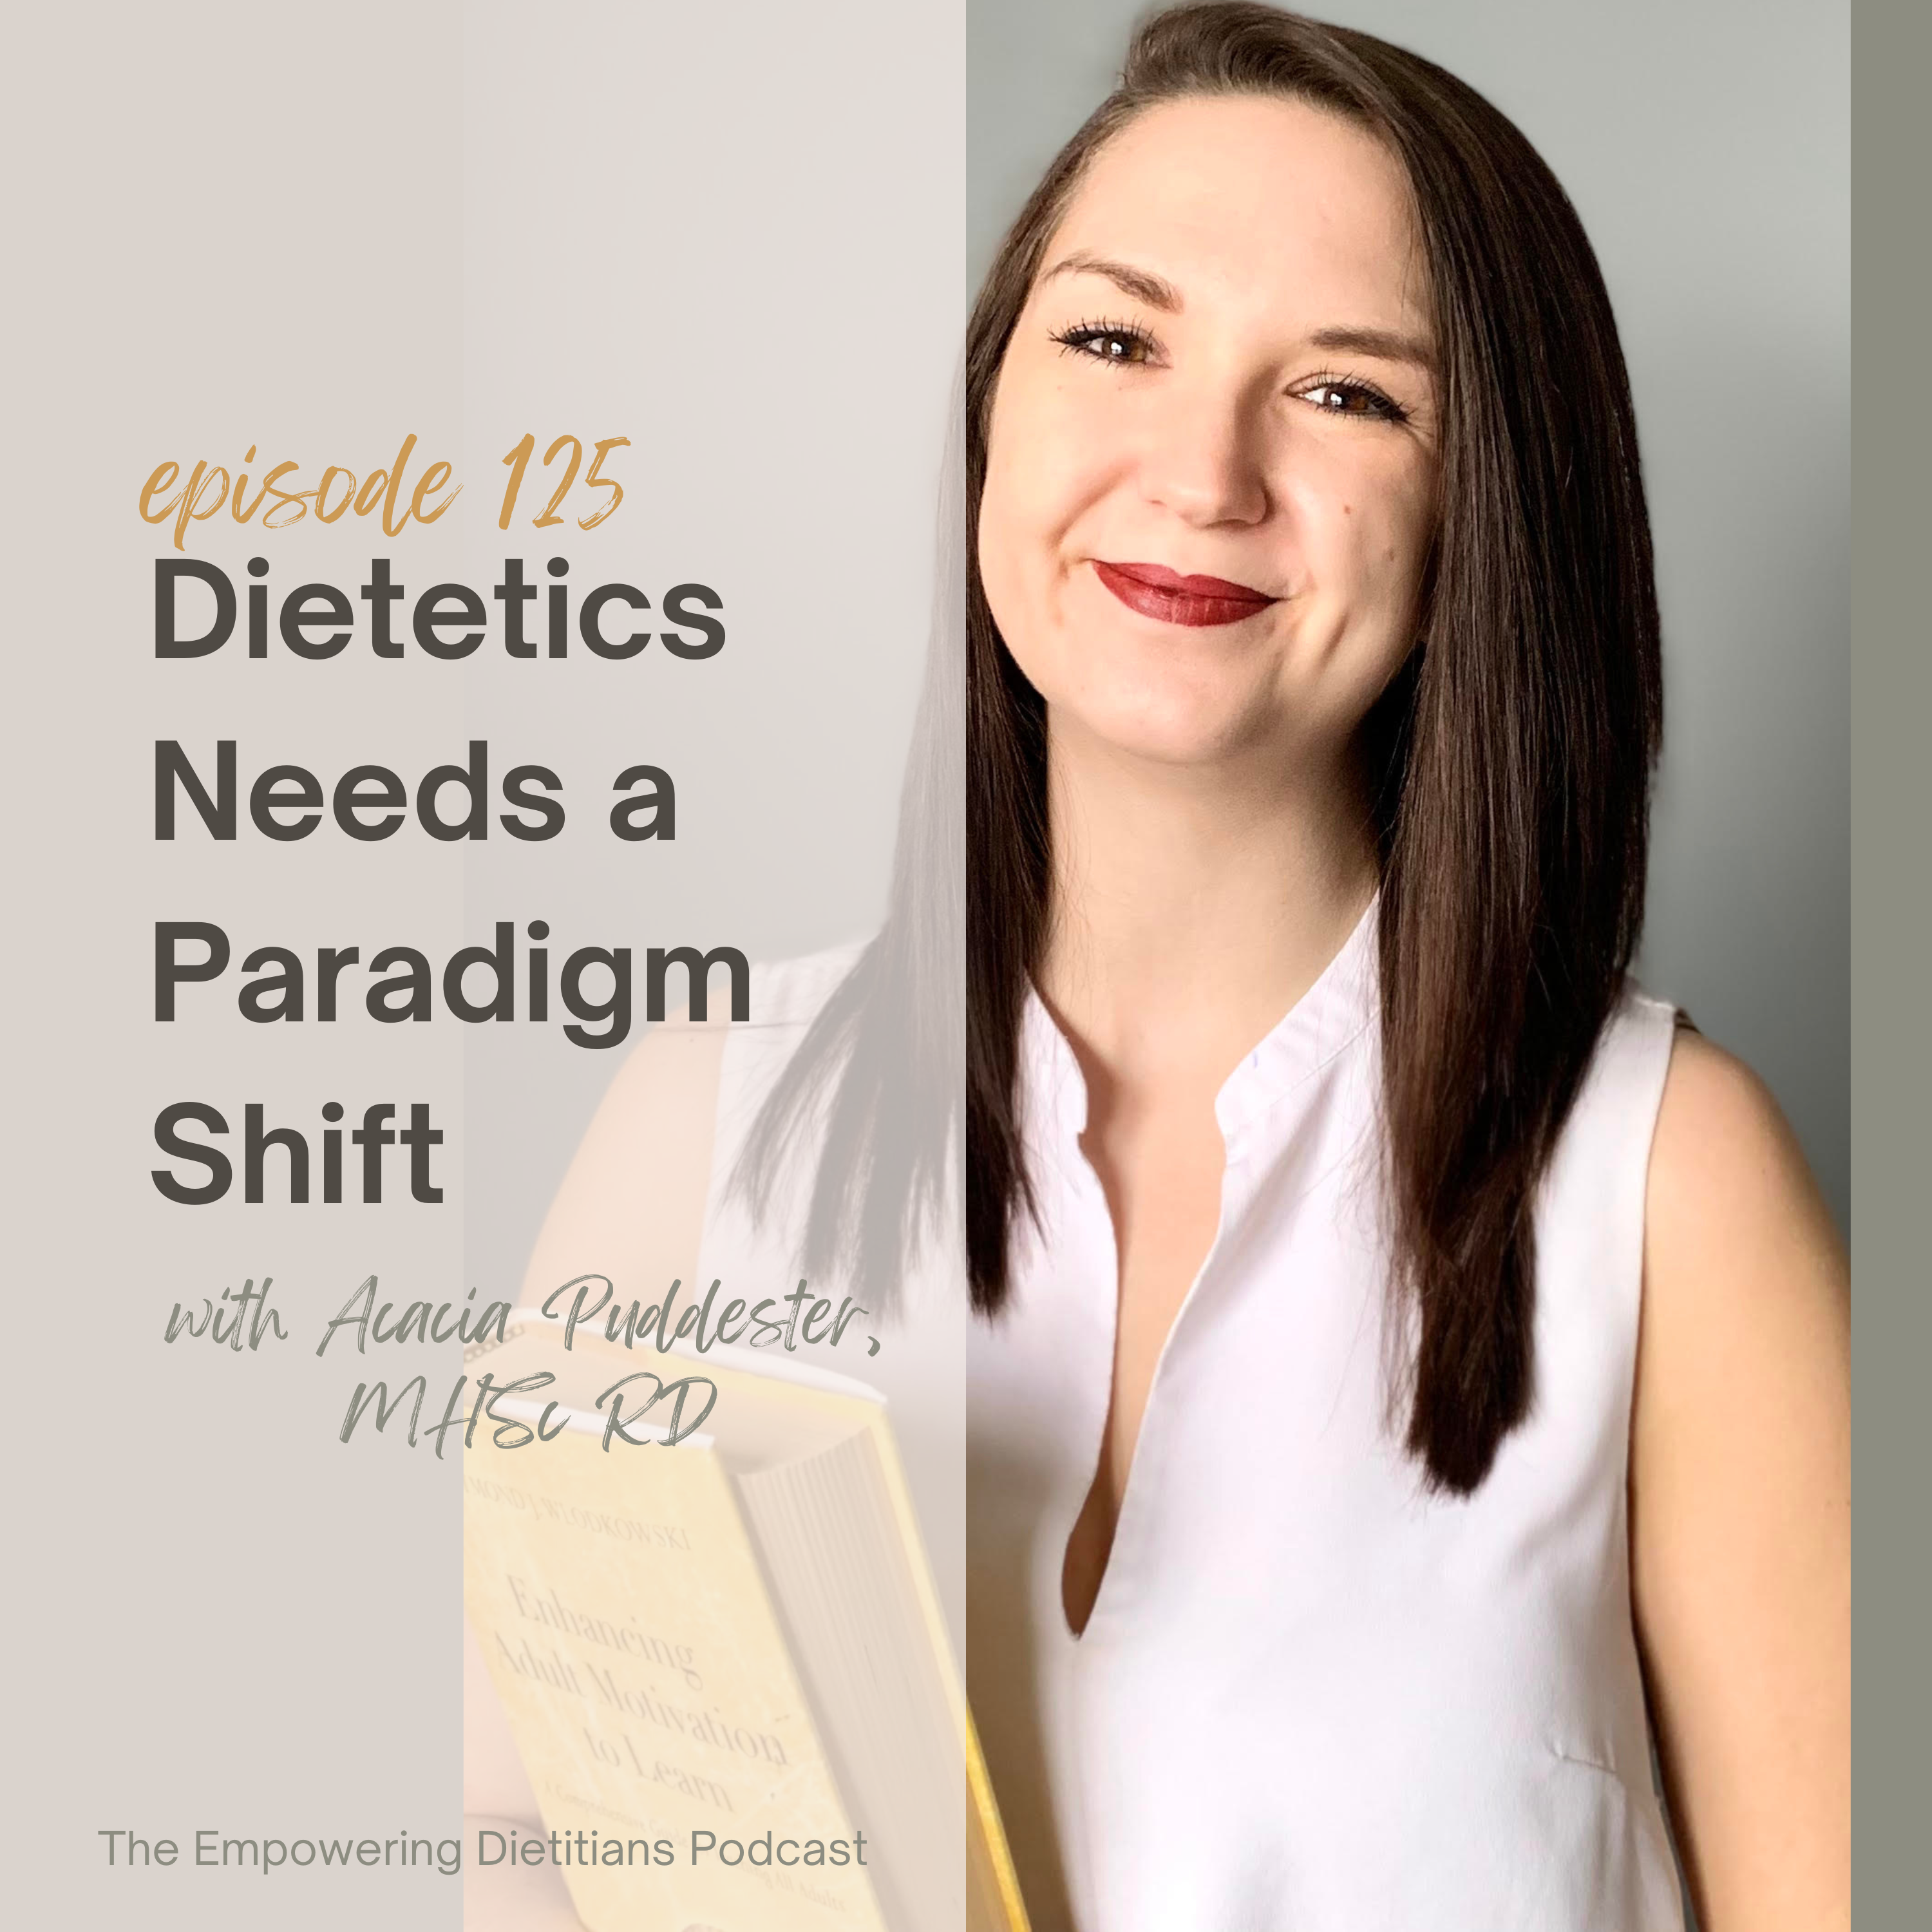 dietetics needs a paradigm shift with acacia puddester